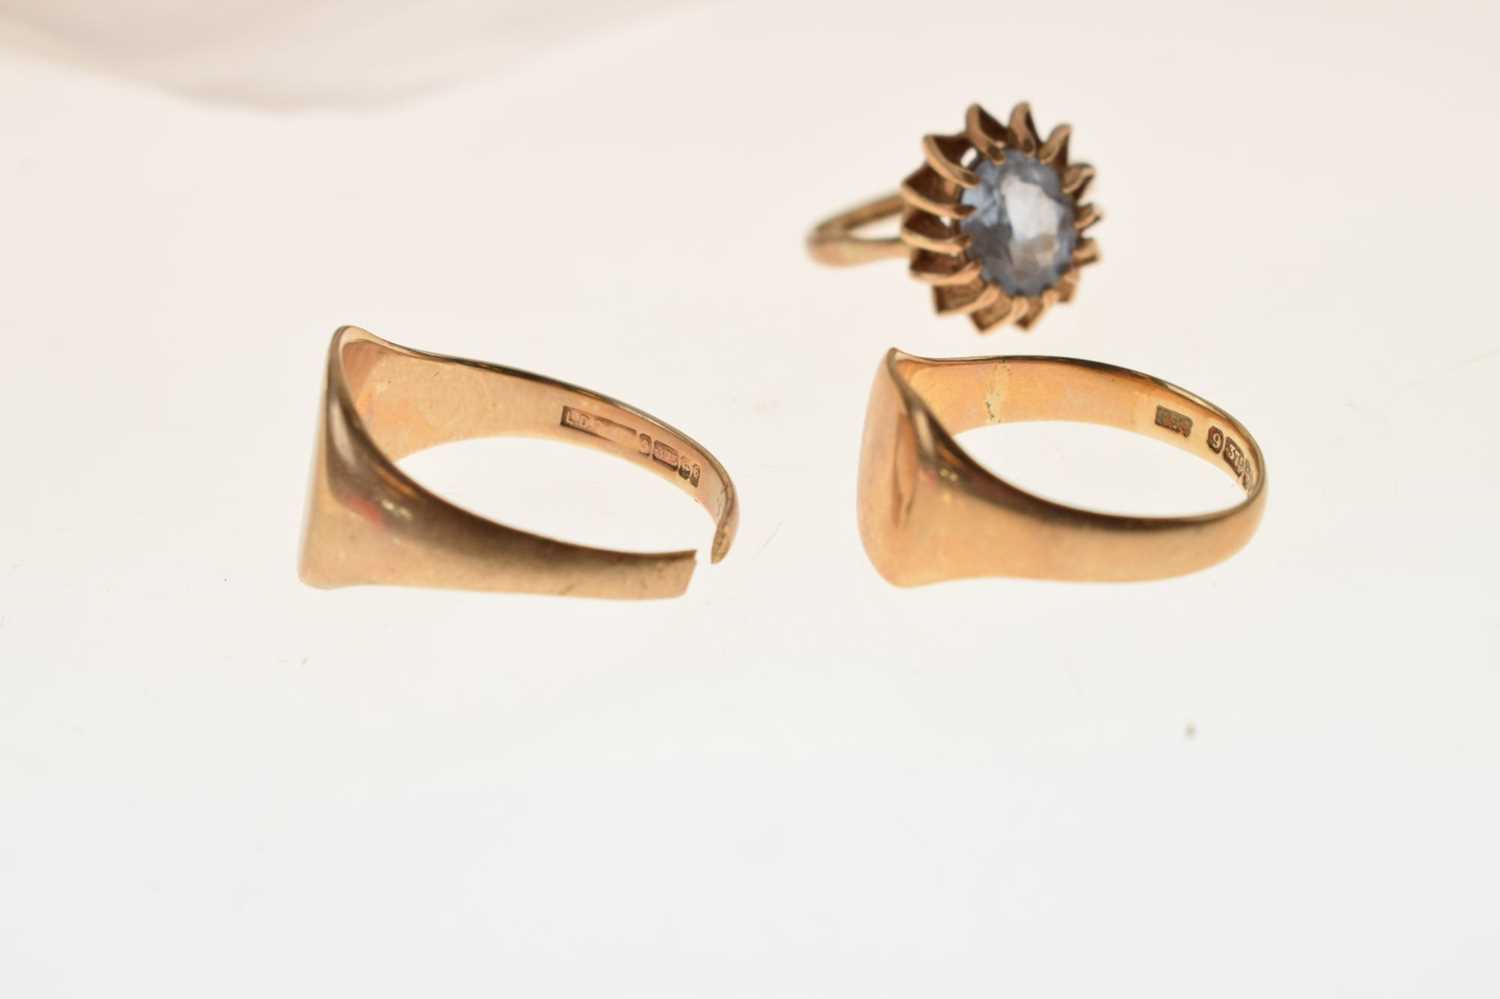 Two 9ct gold signet rings - Image 4 of 10